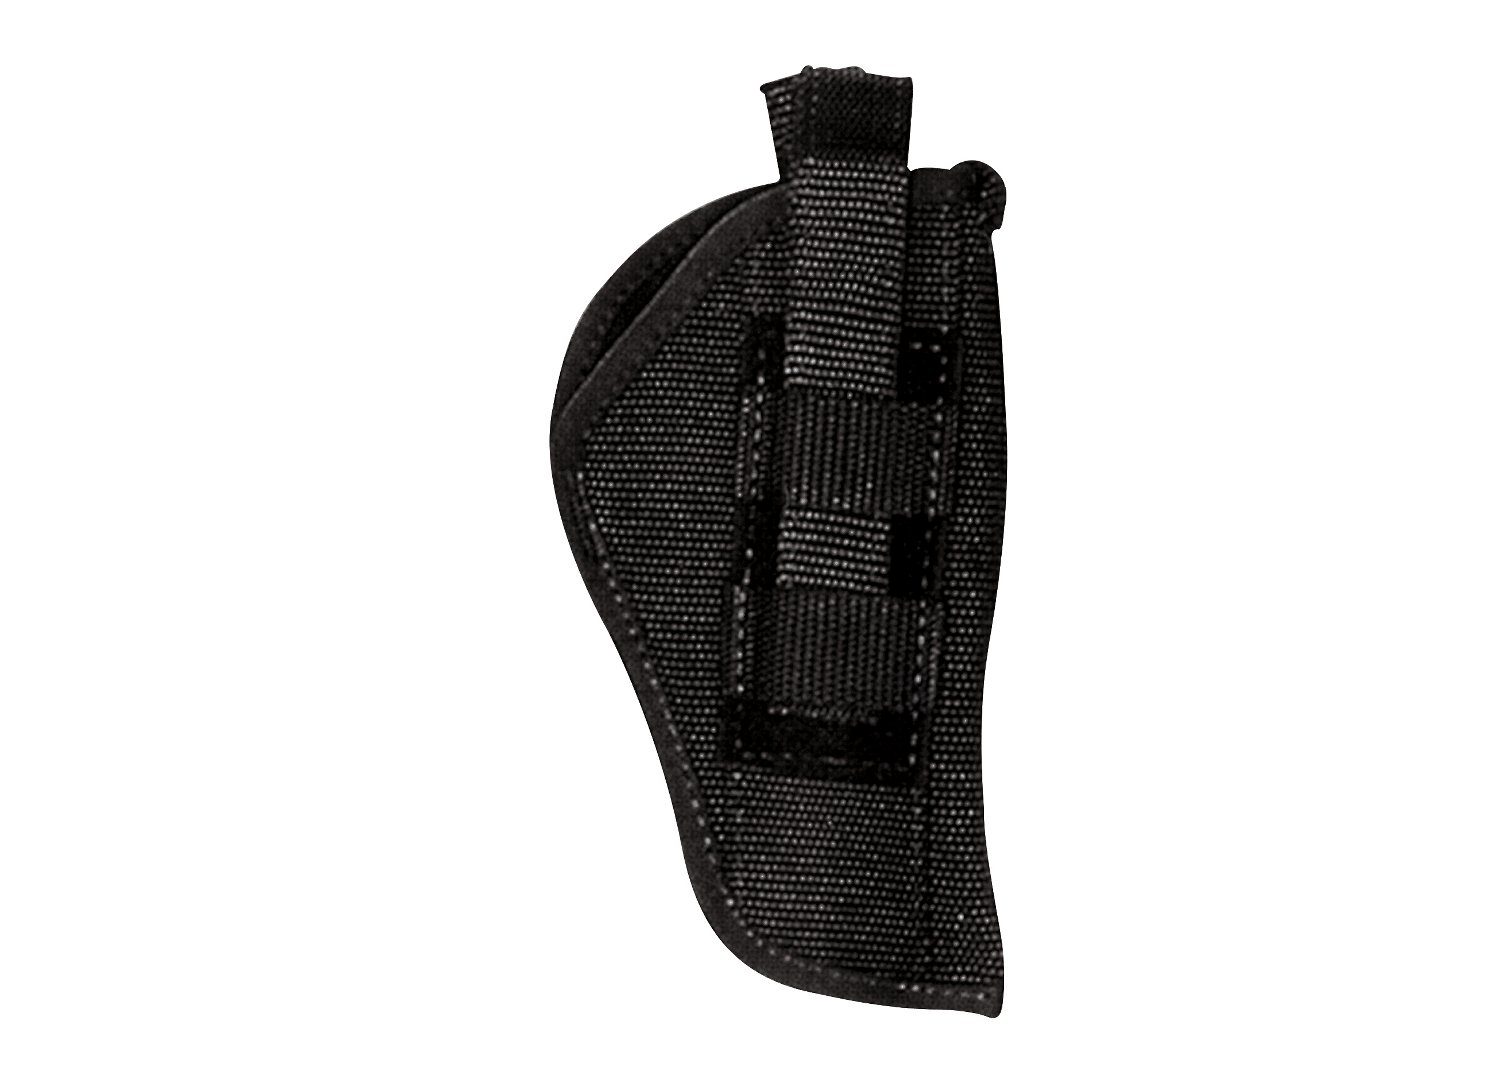 Rothco Police Holster - Tactical Choice Plus